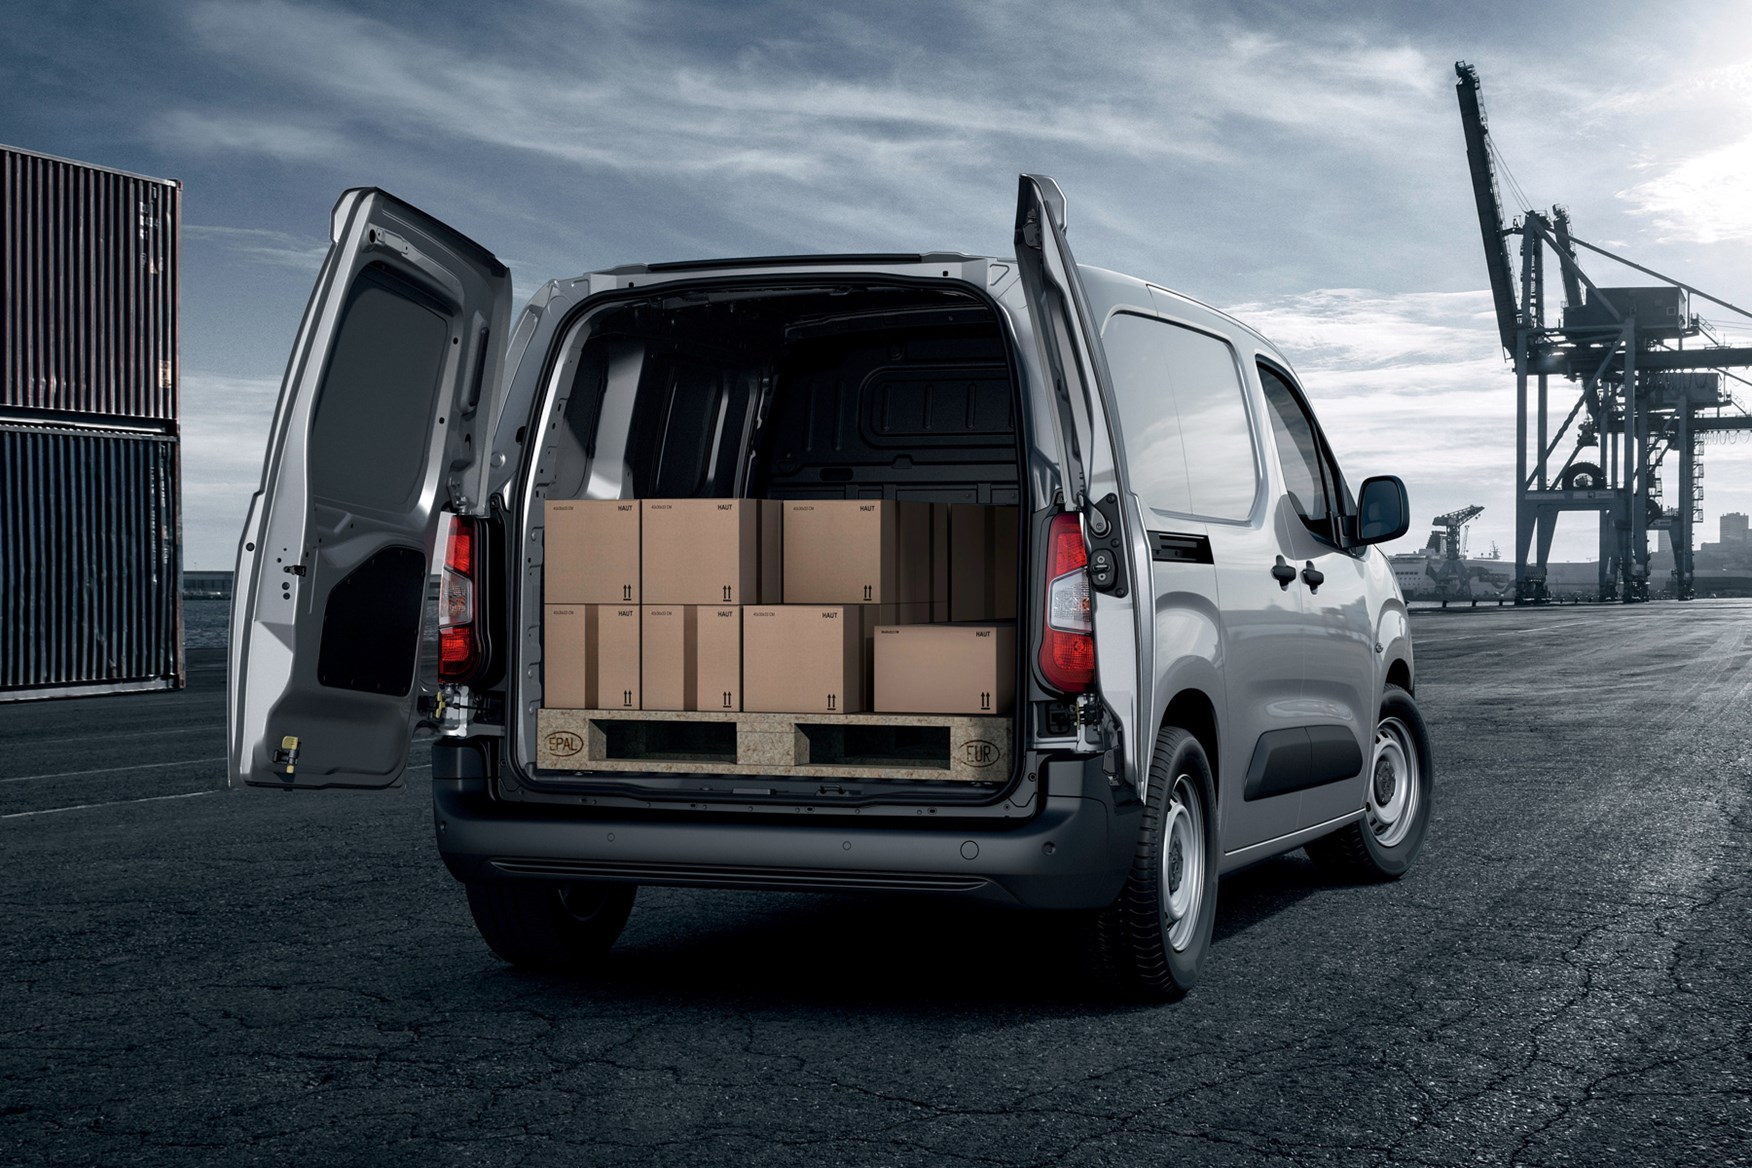 Peugeot Partner review 2020, rear view, load area filled with boxes